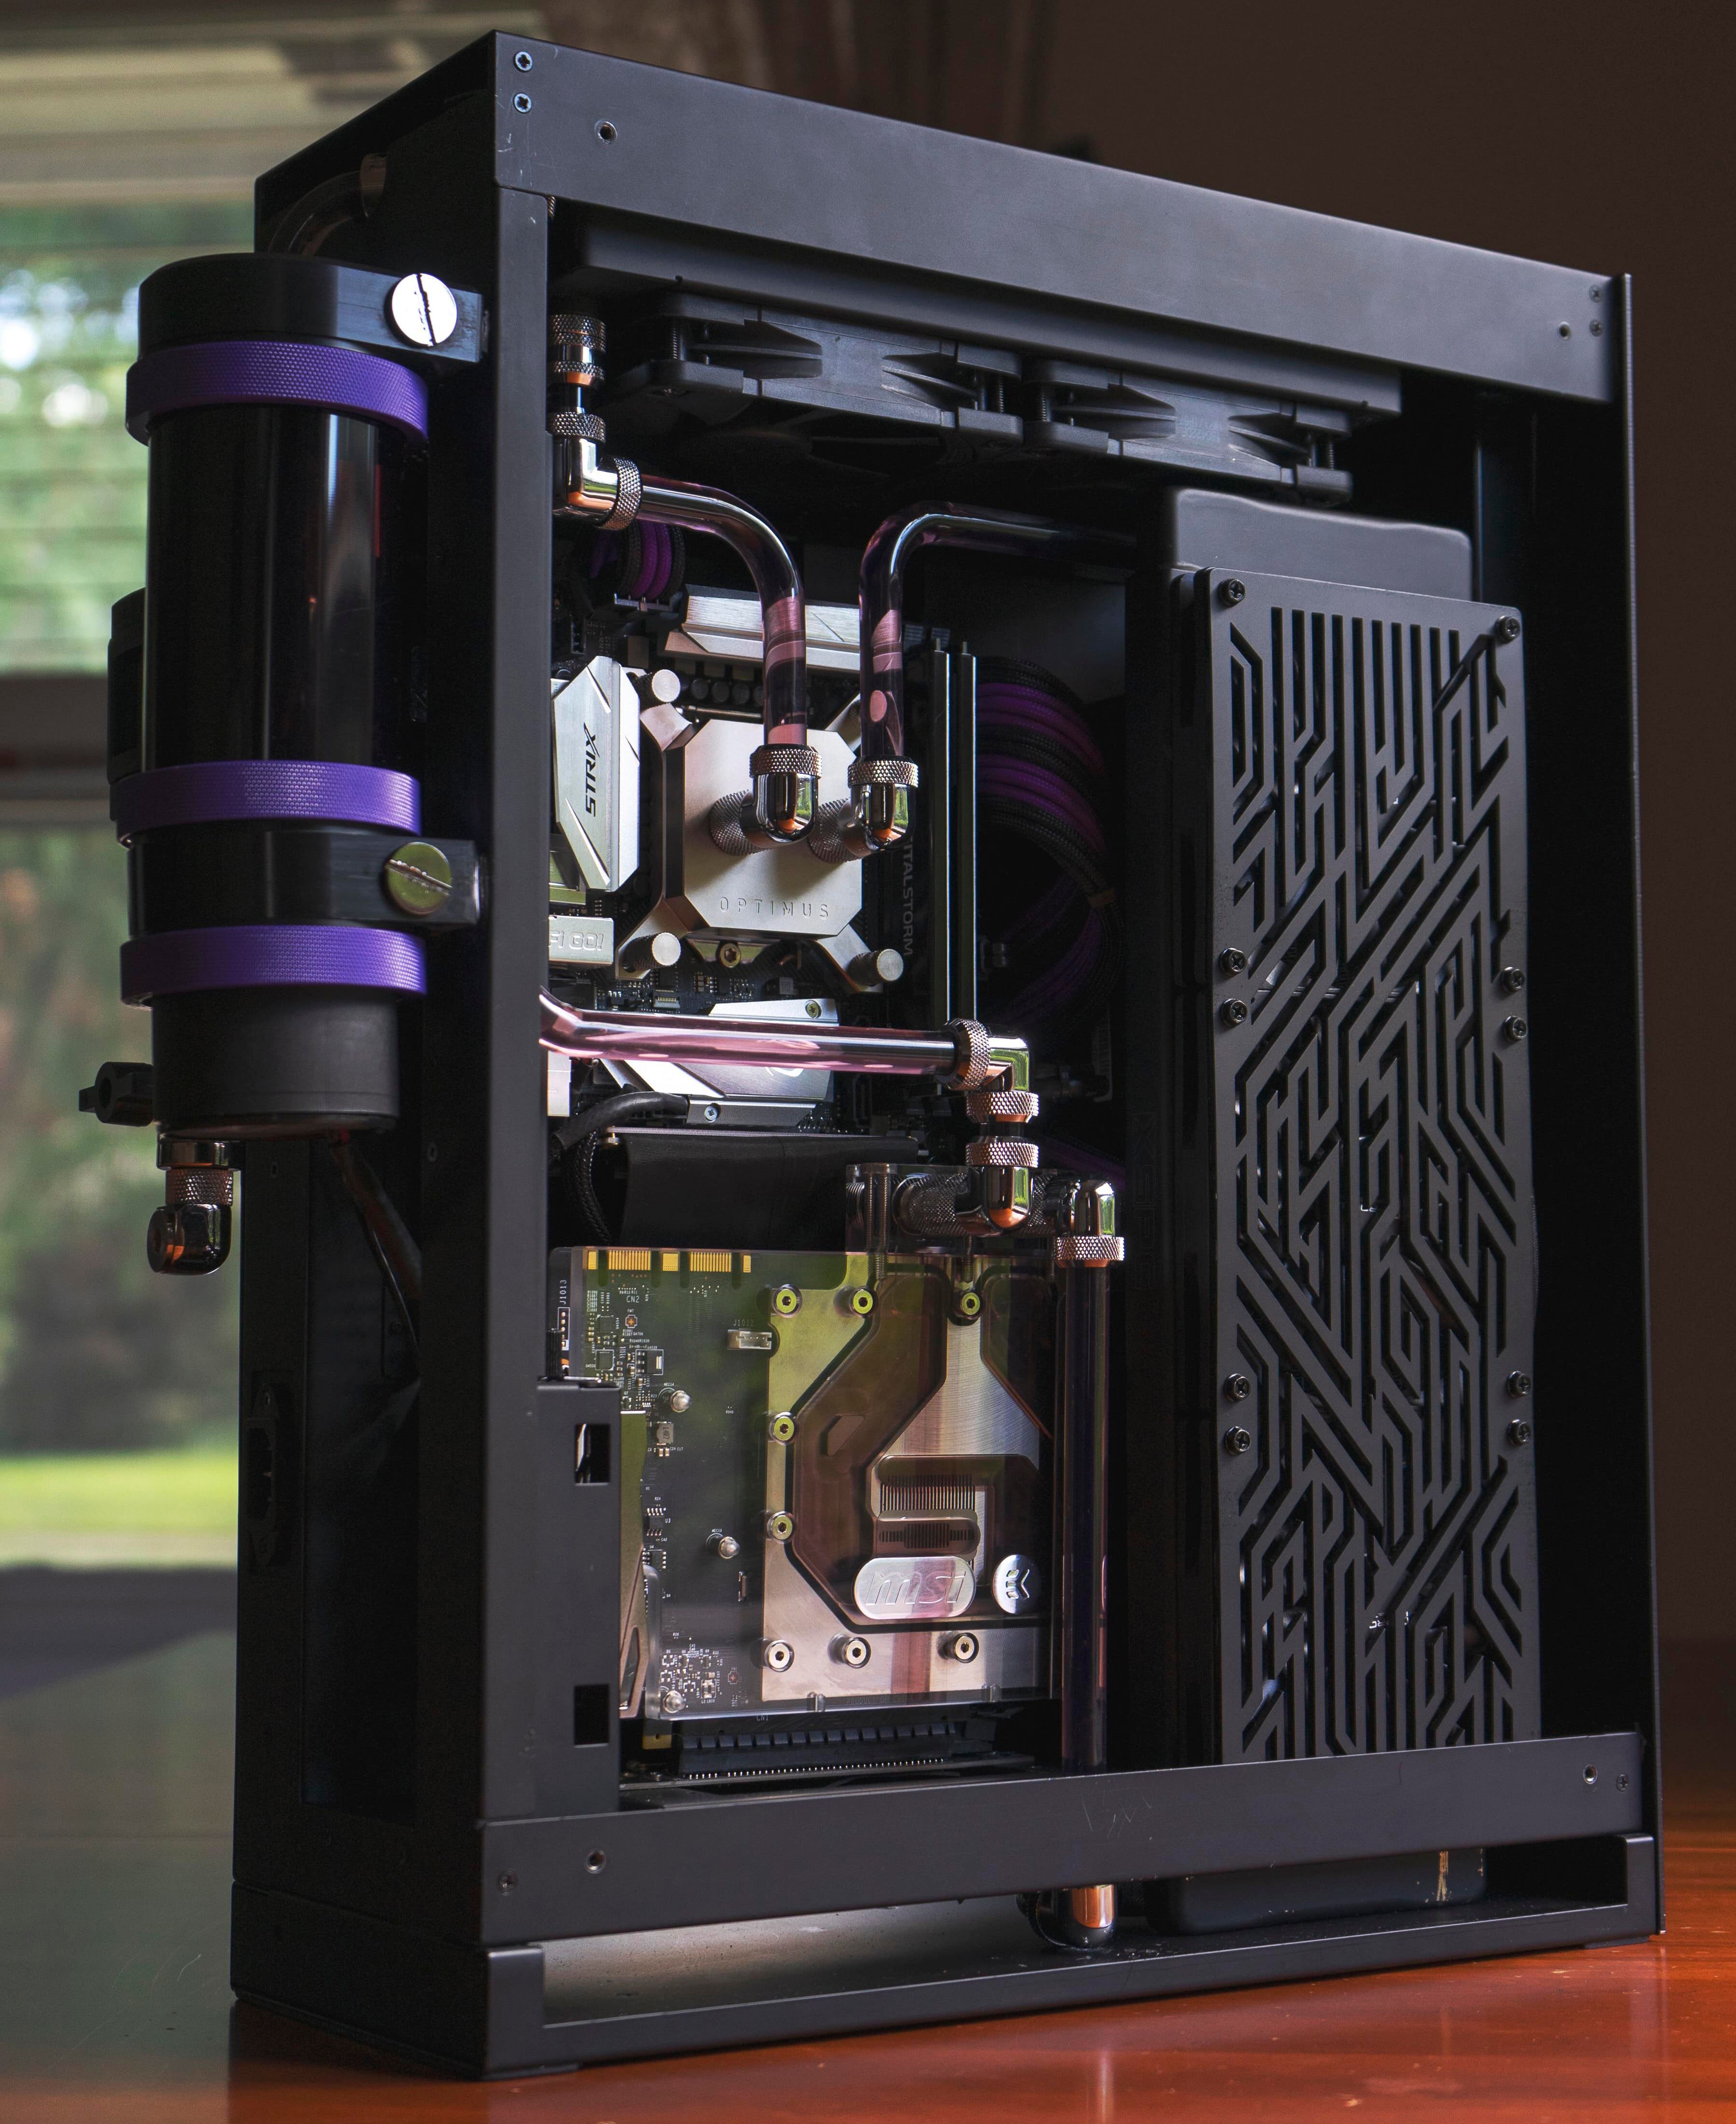 Custom water-cooled PC with tube reservoir mounted externally